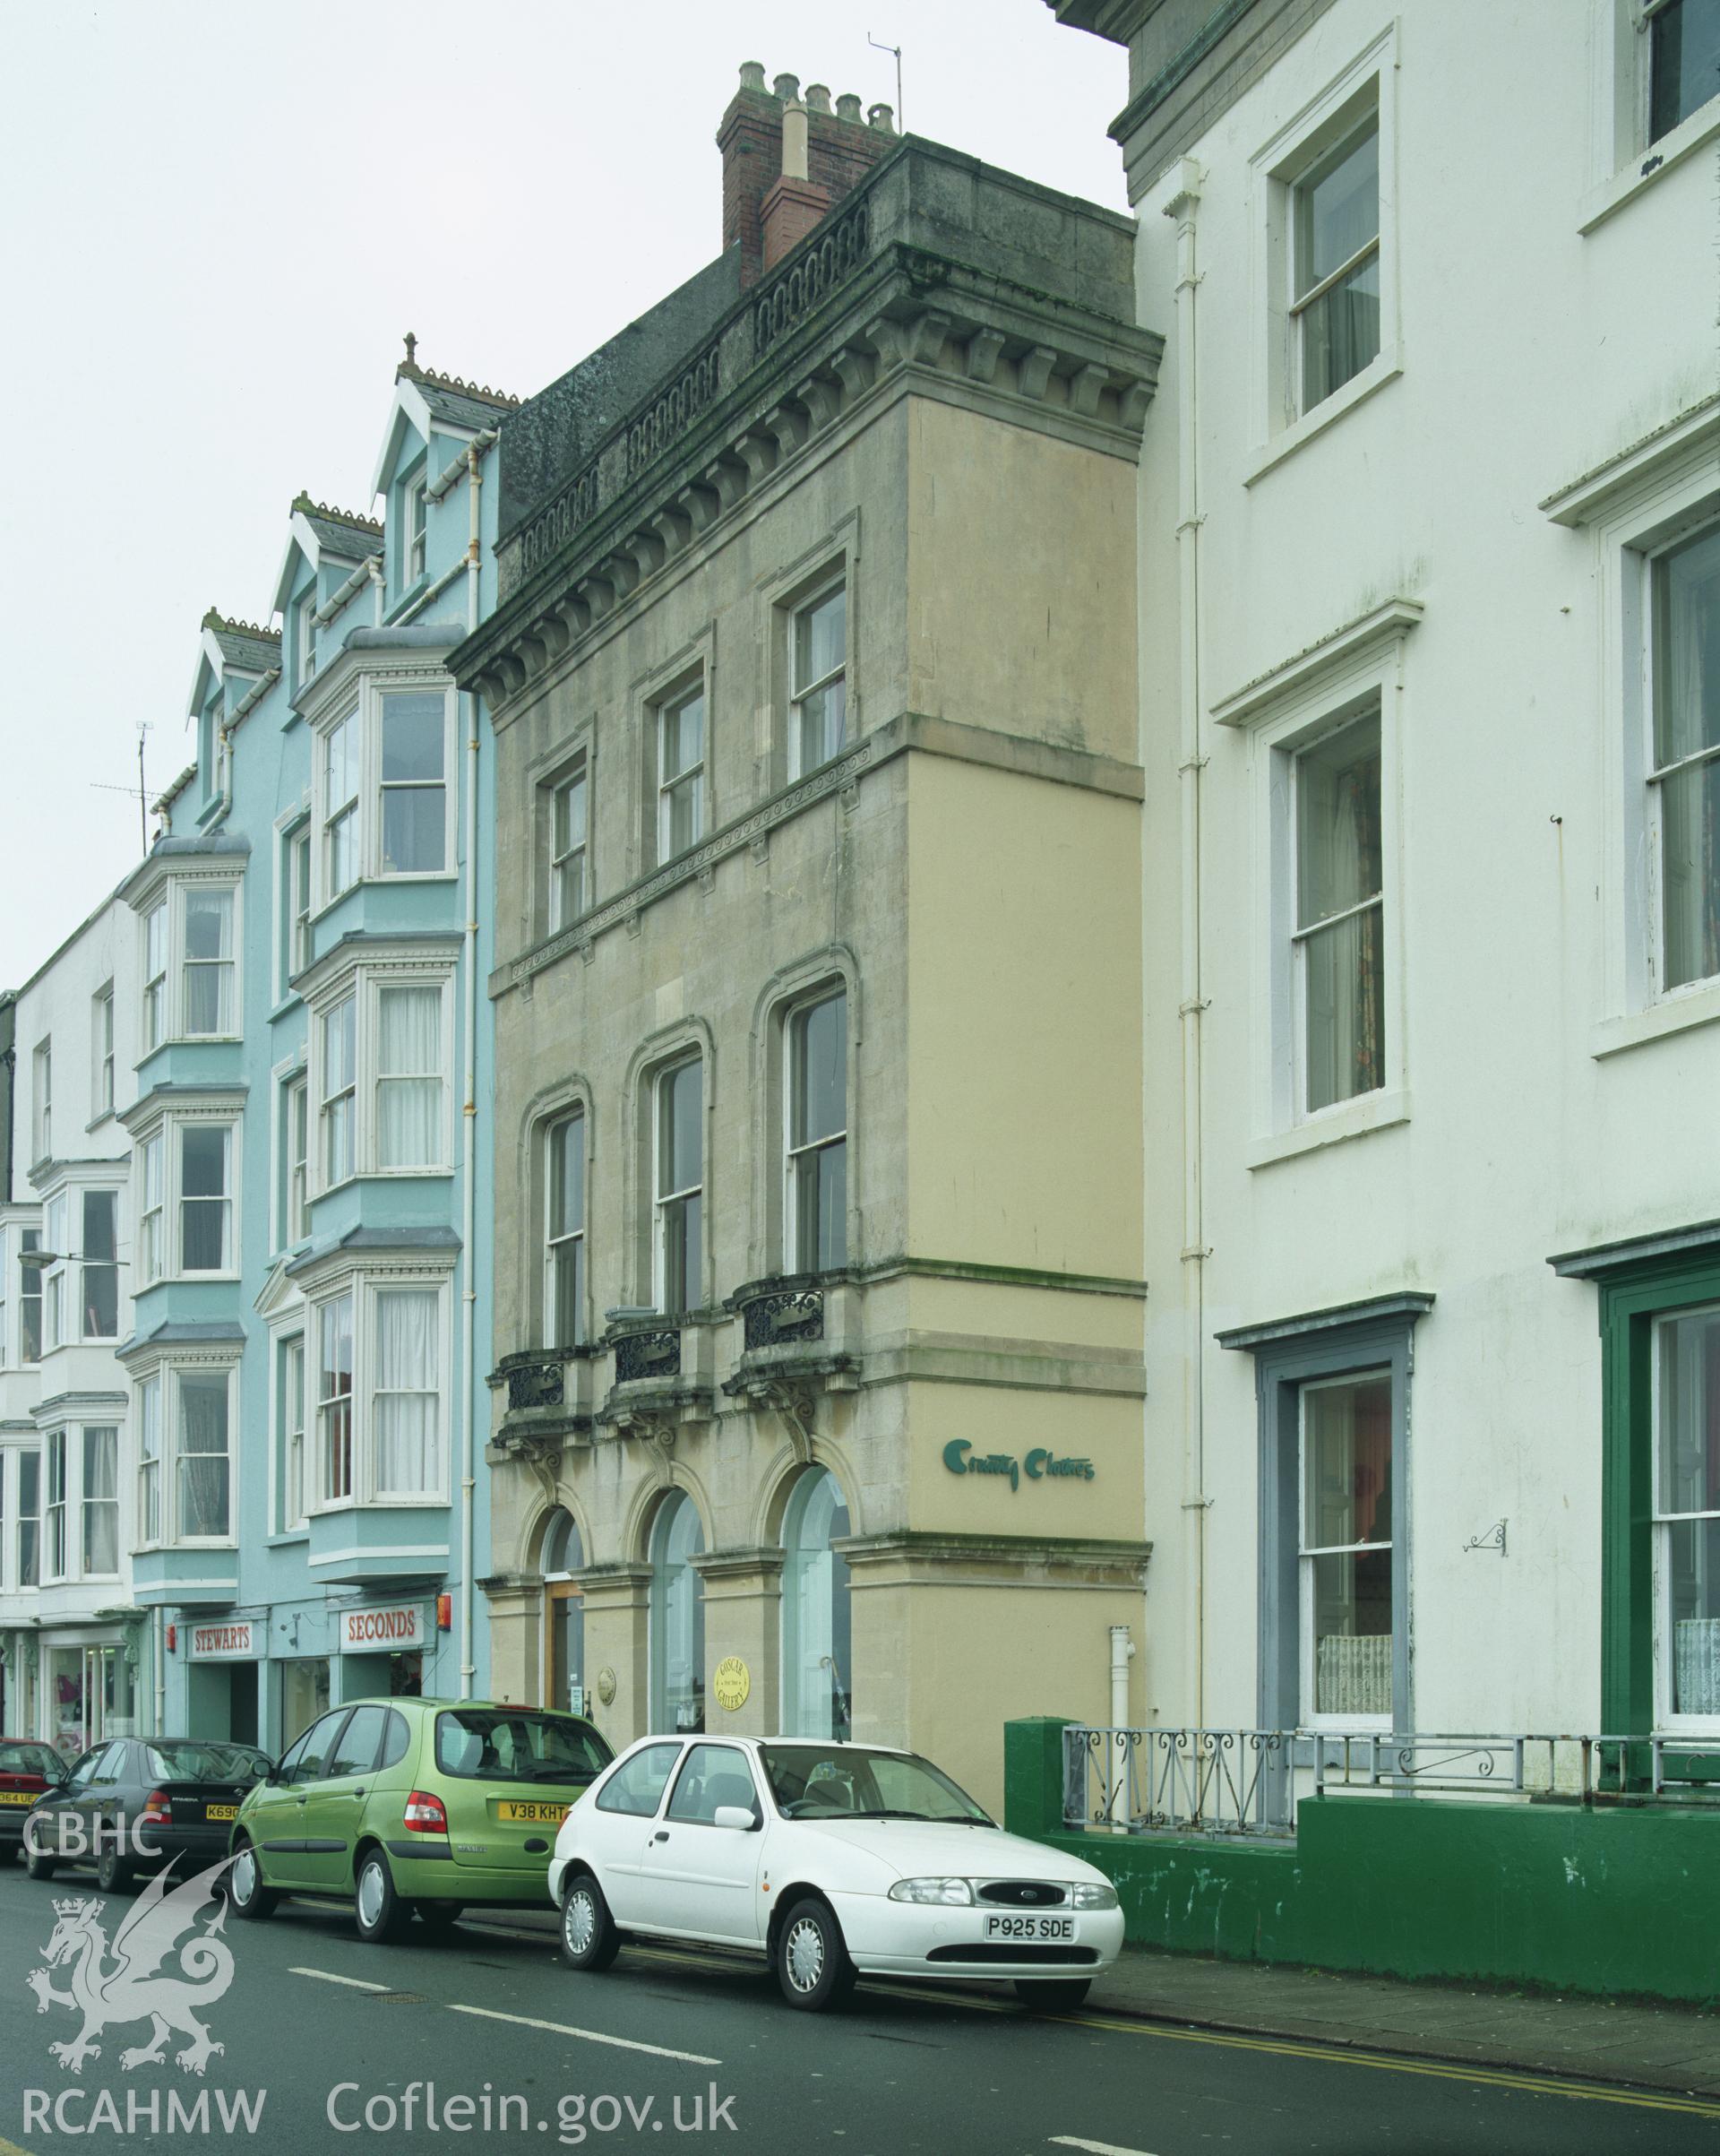 RCAHMW colour transparency showing an exterior view of Prize House, Tenby.